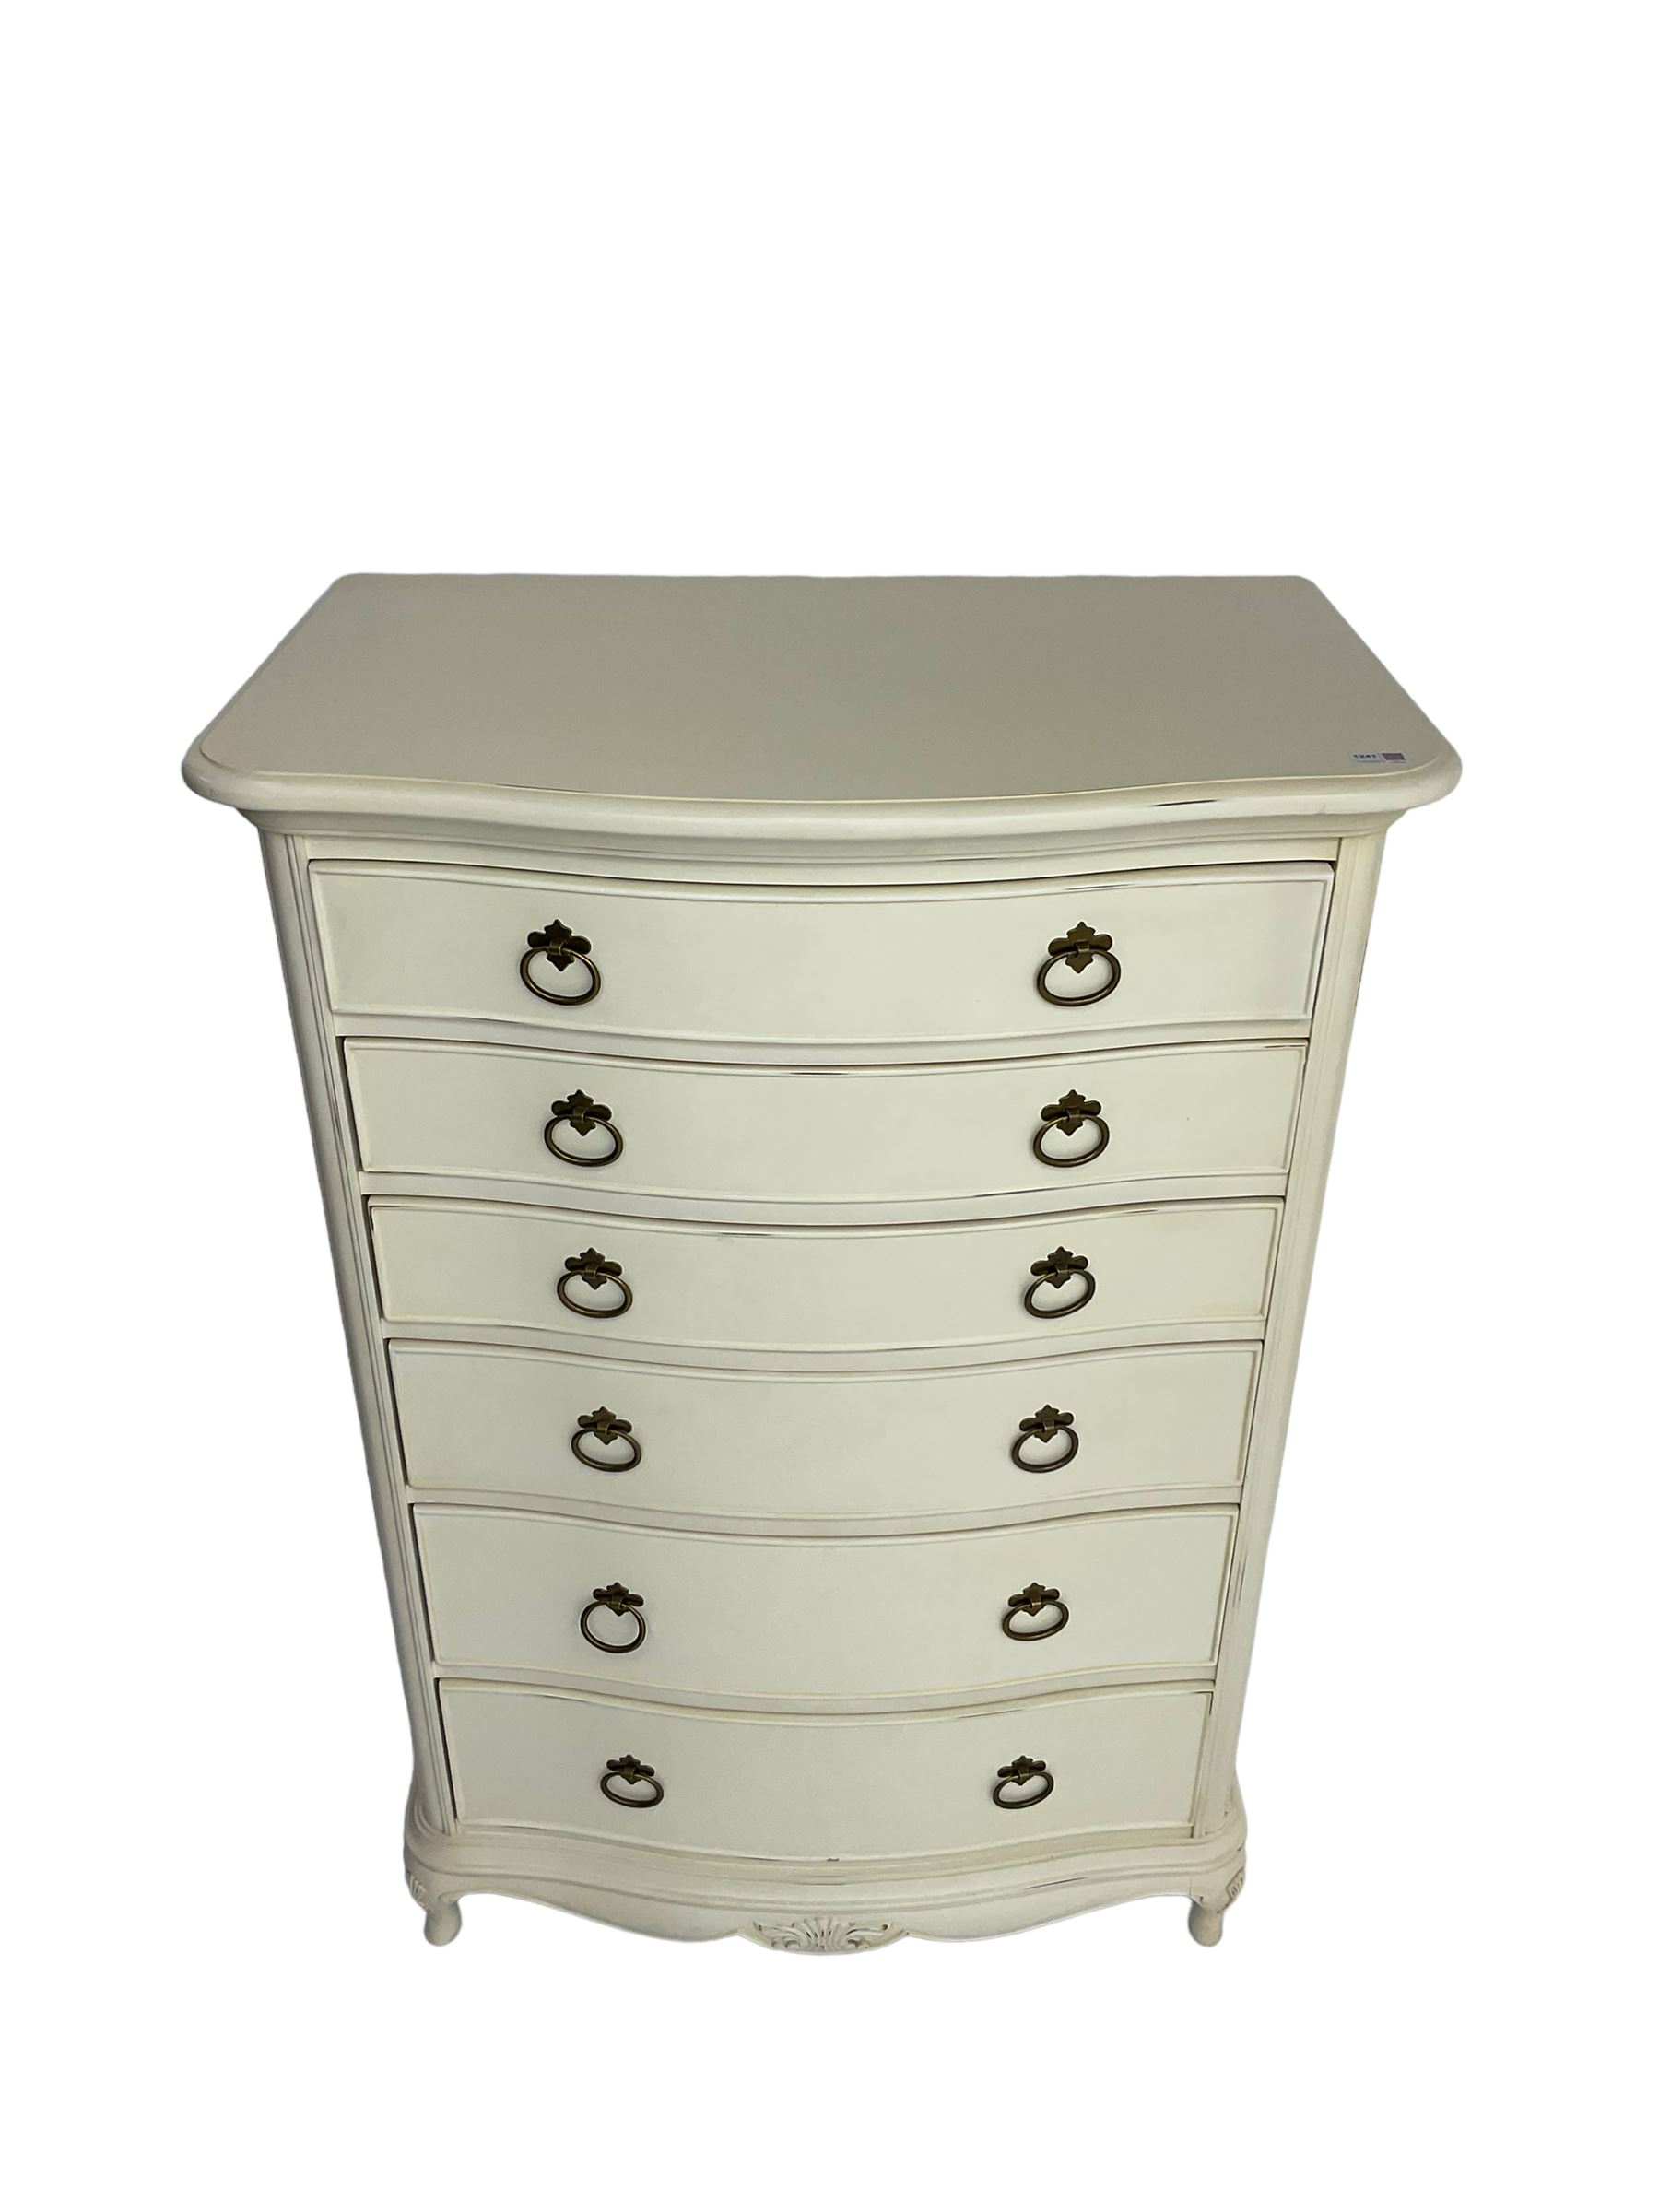 Willis and Gambier - chest fitted with graduating drawers - Image 6 of 6